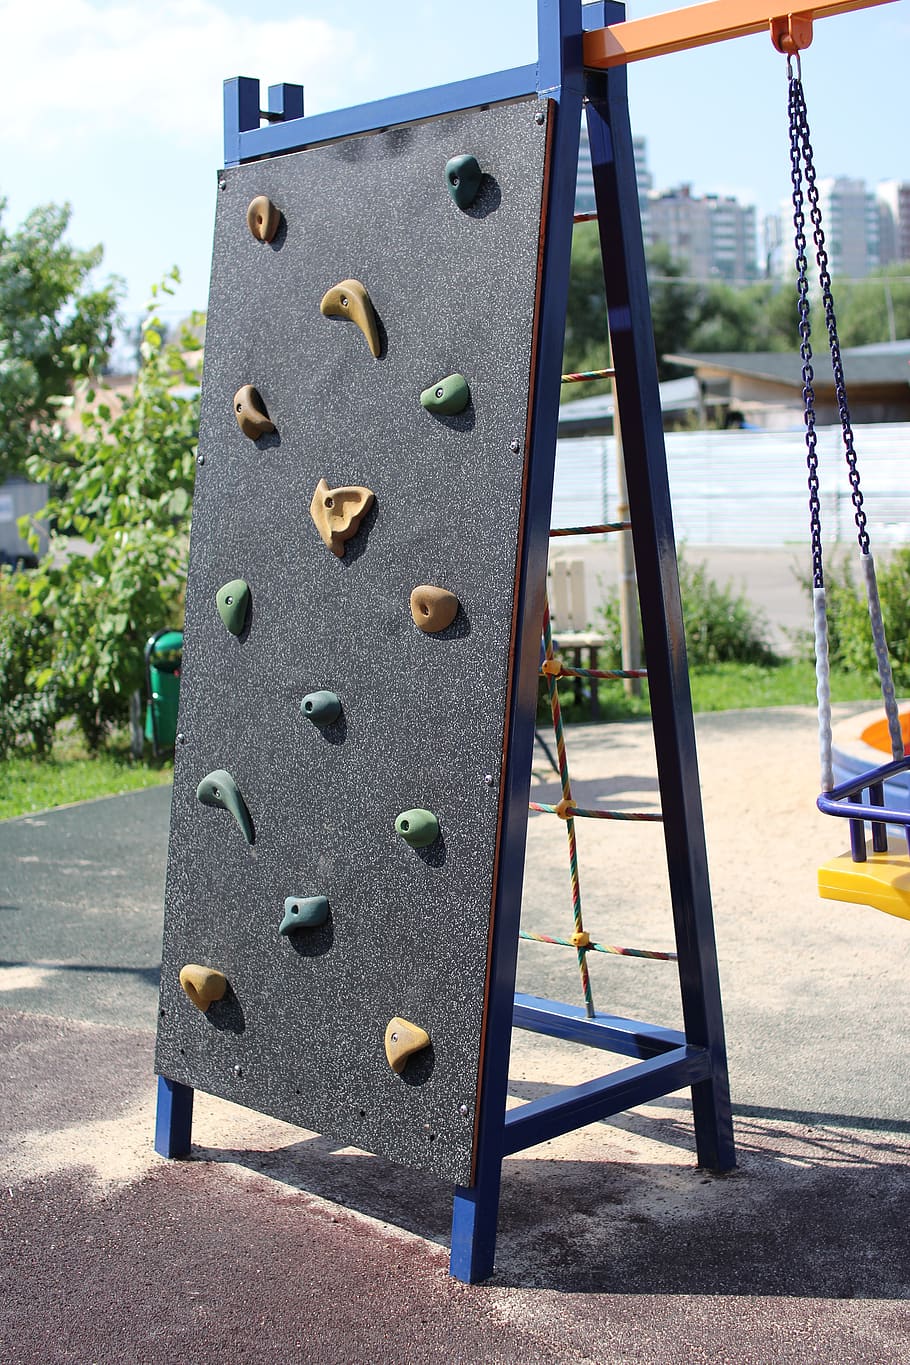 playground, outdoors, travel, rock climber, climbing, for children, day, metal, focus on foreground, nature